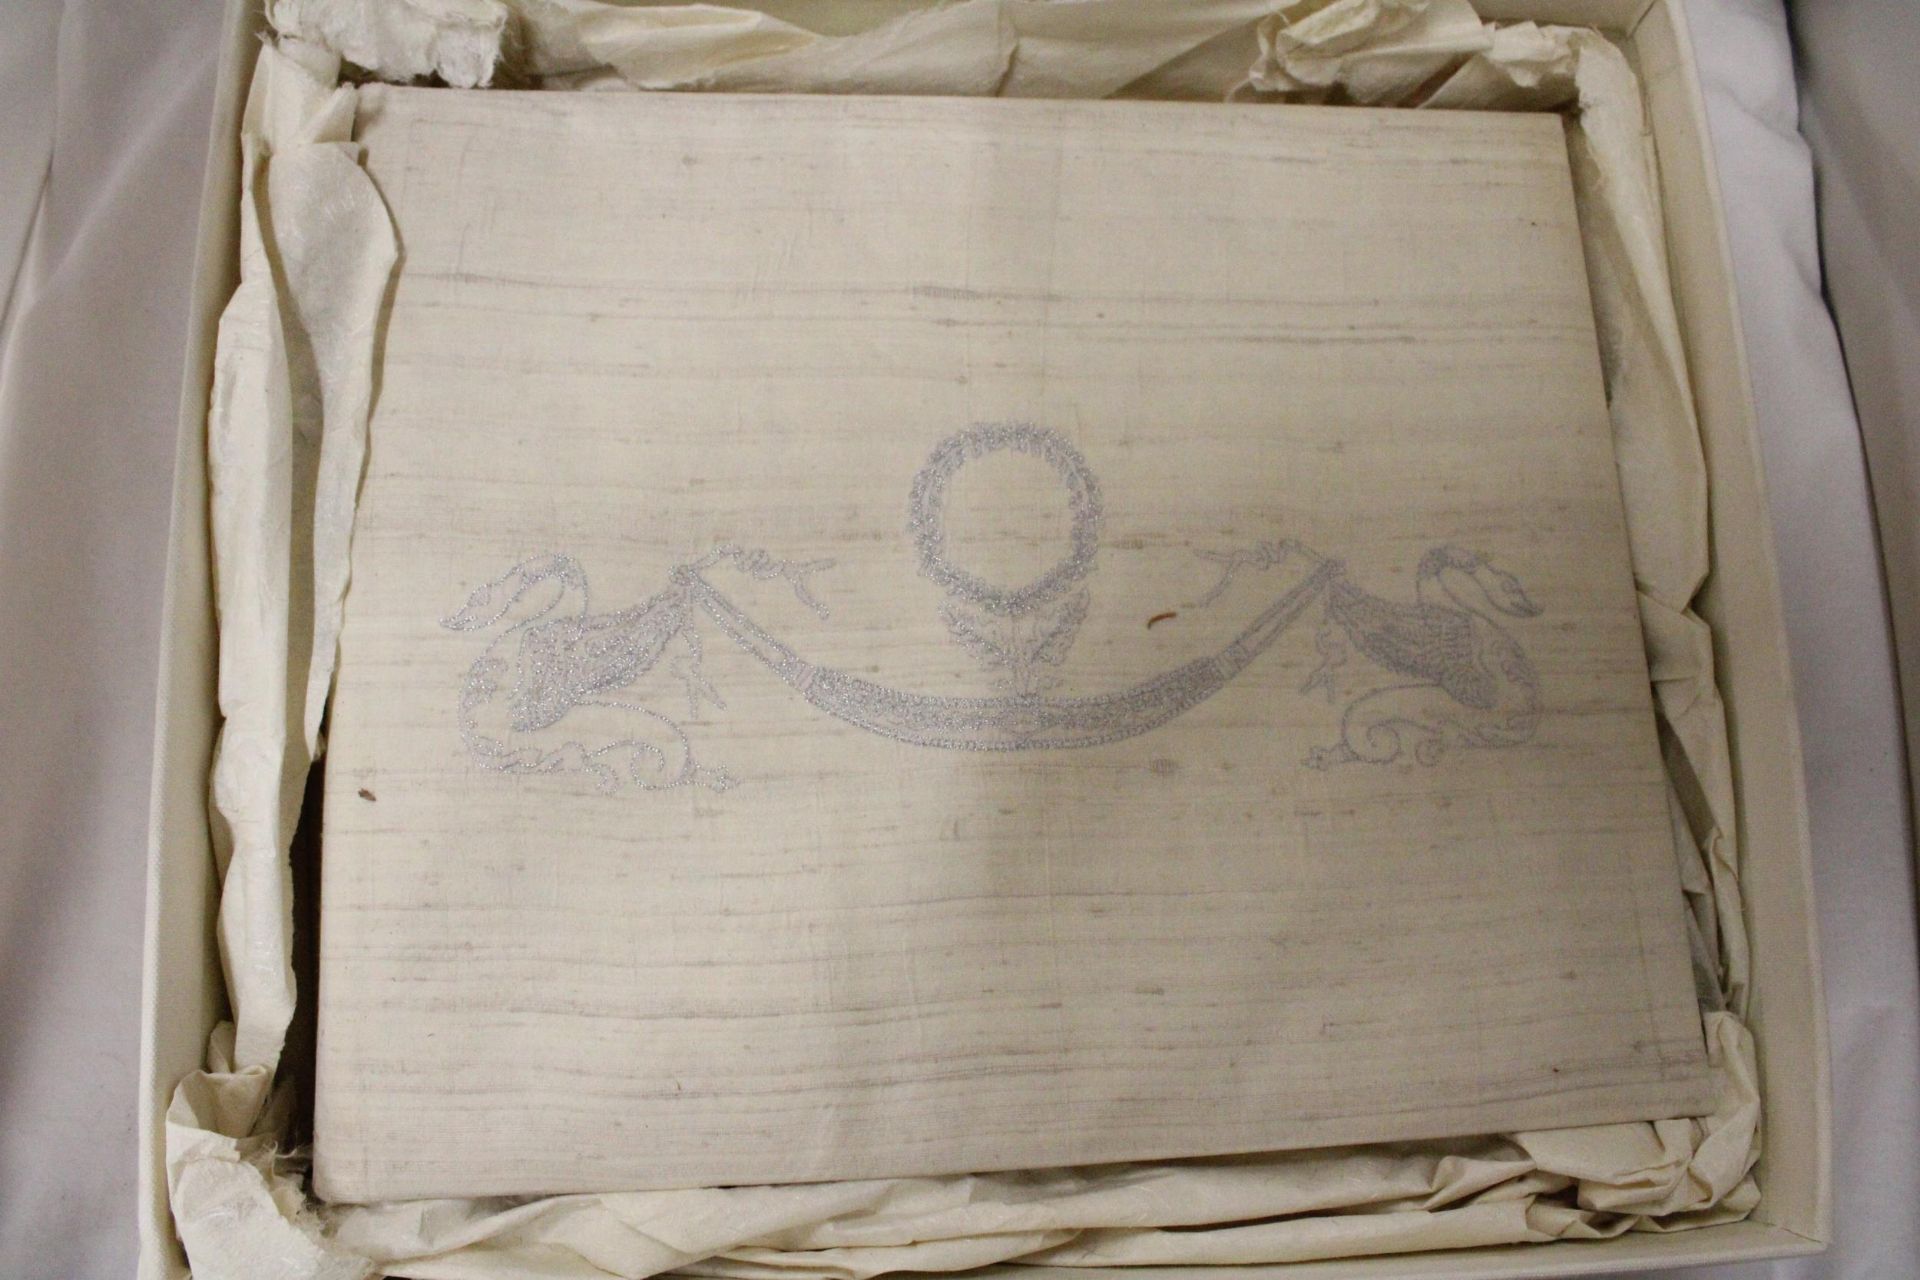 A LARGE PHOTOGRAPH ALBUM WITH AN EMBROIDERED SILK COVER - Image 2 of 4